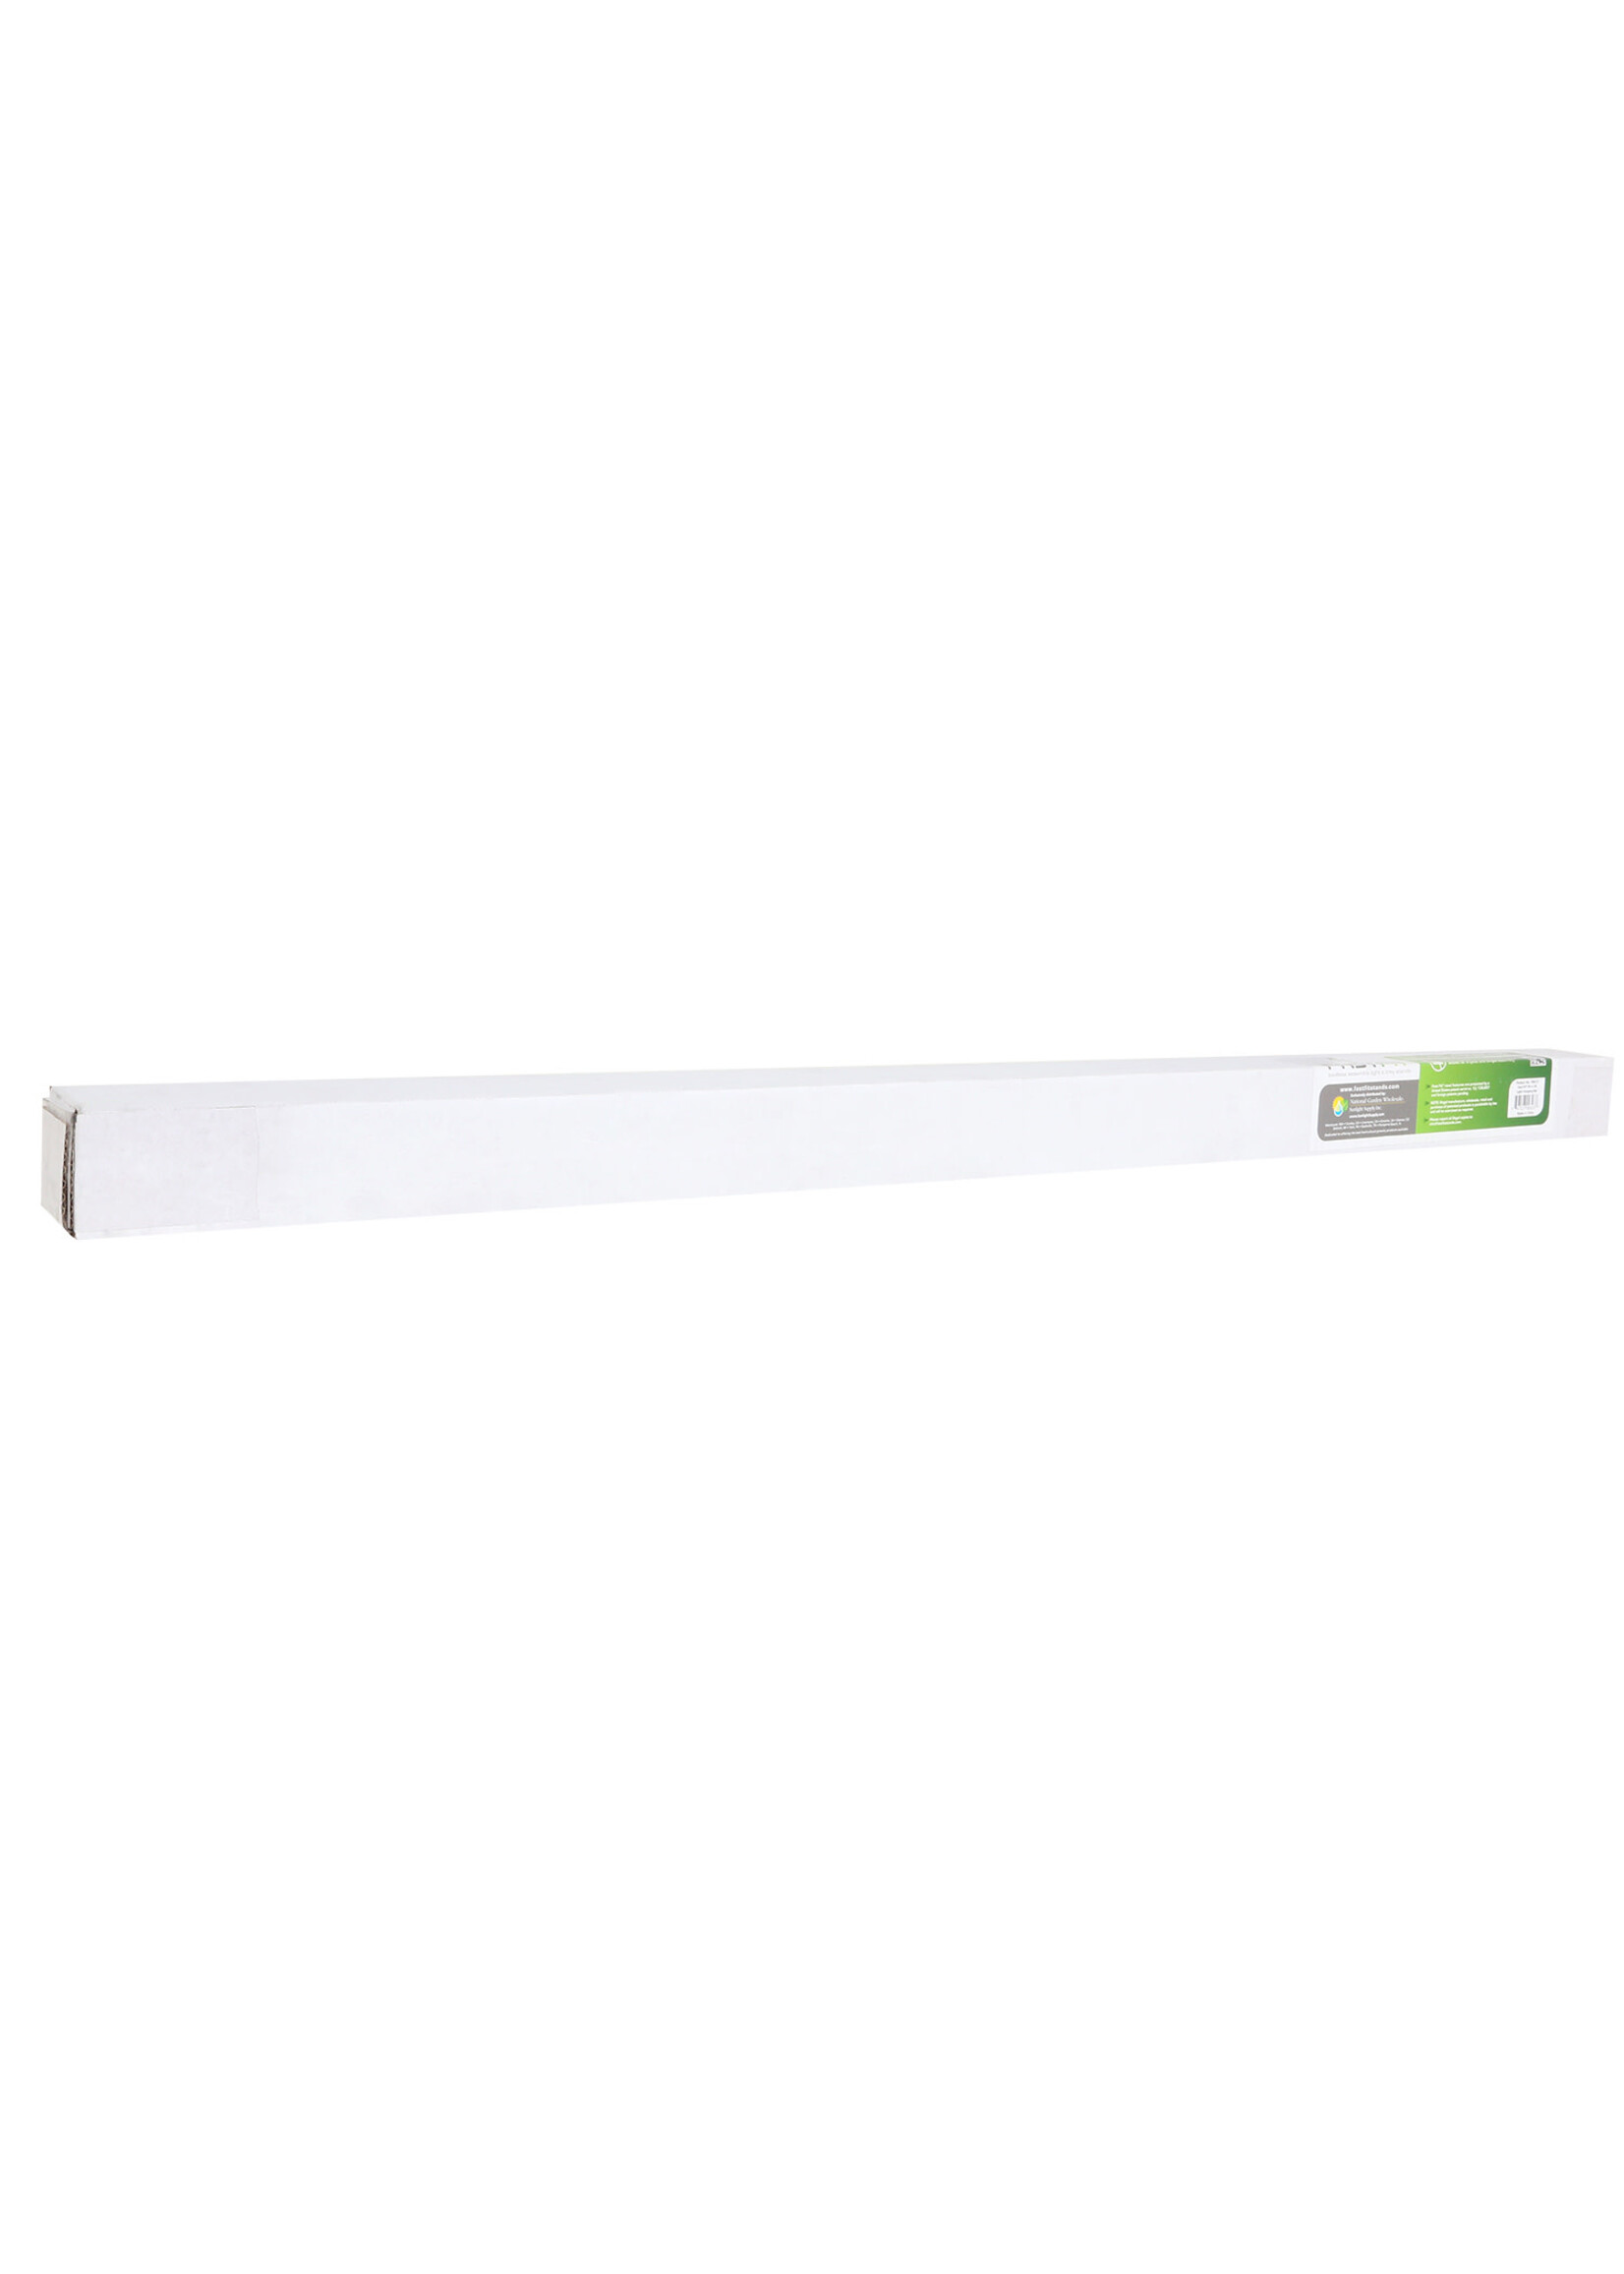 Fast Fit Fast Fit Light Hanging Bar for 3 ft x 3 ft